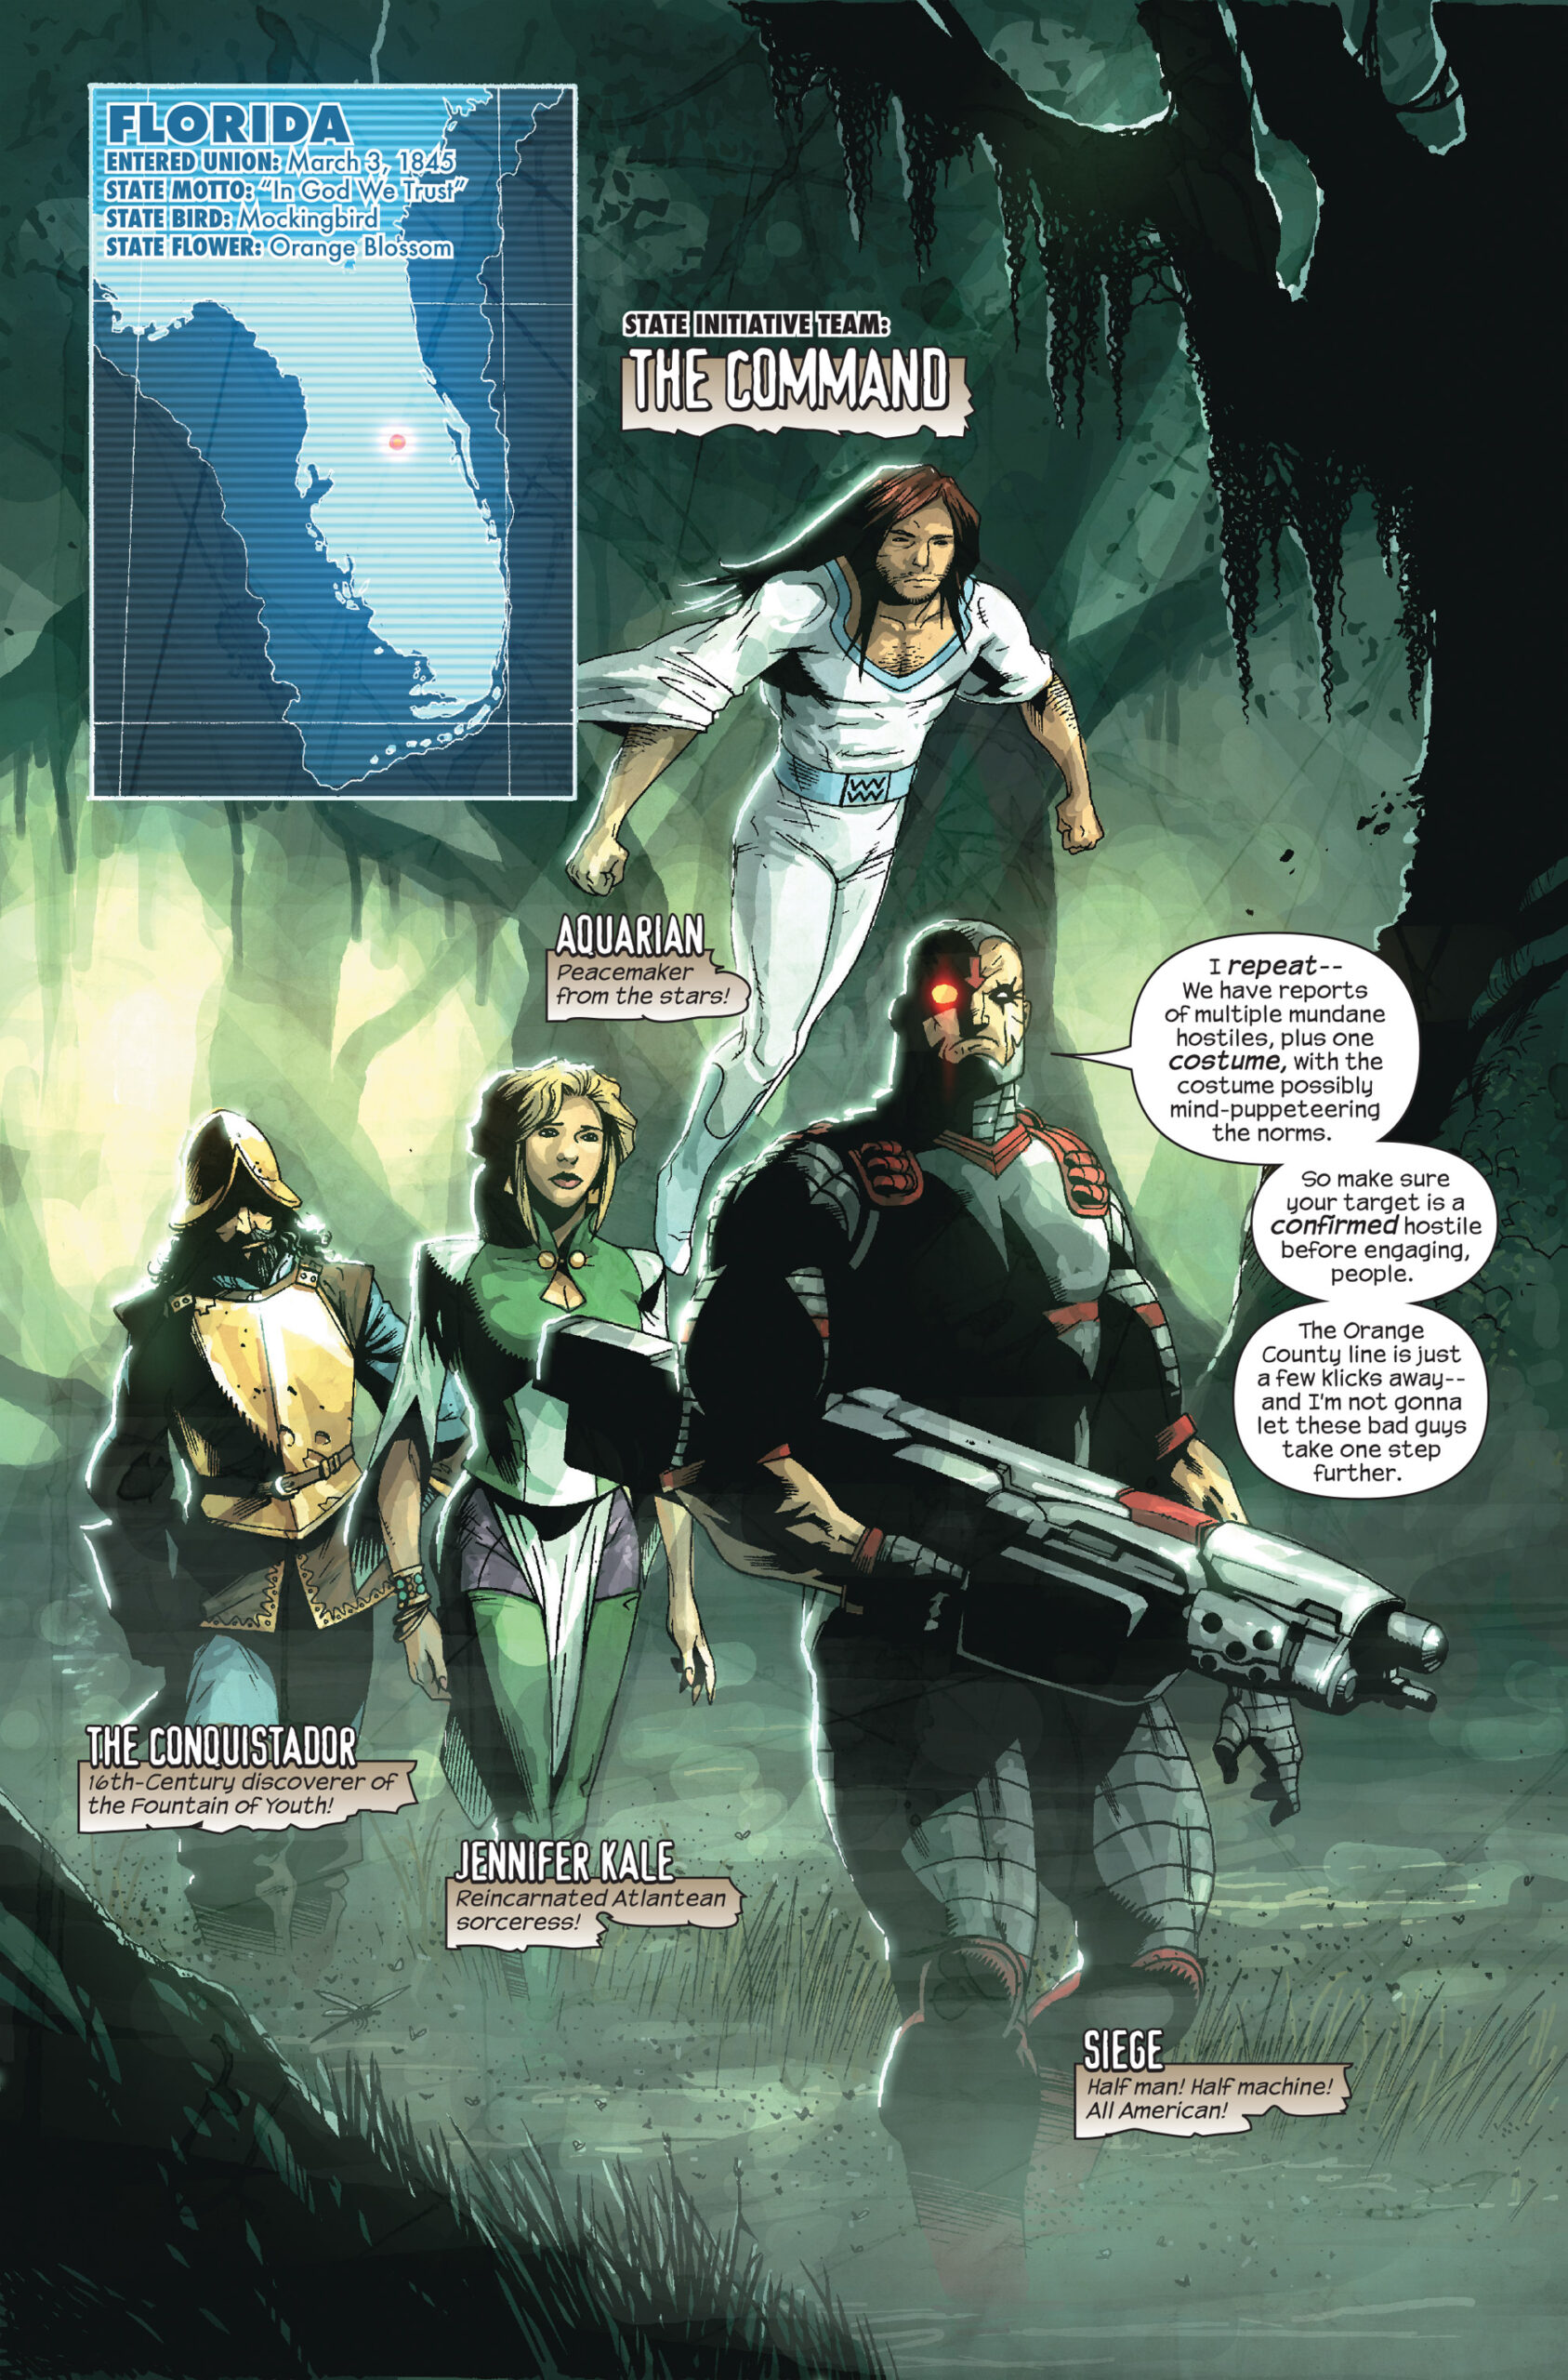 The Command undertakes their final mission in Marvel Zombies 3 Vol. 1 #3 (2008), Marvel Comics. Words by Fred van Lente, art by Kev Walker, Jean-François Beaulieu, and Rus Wooton.